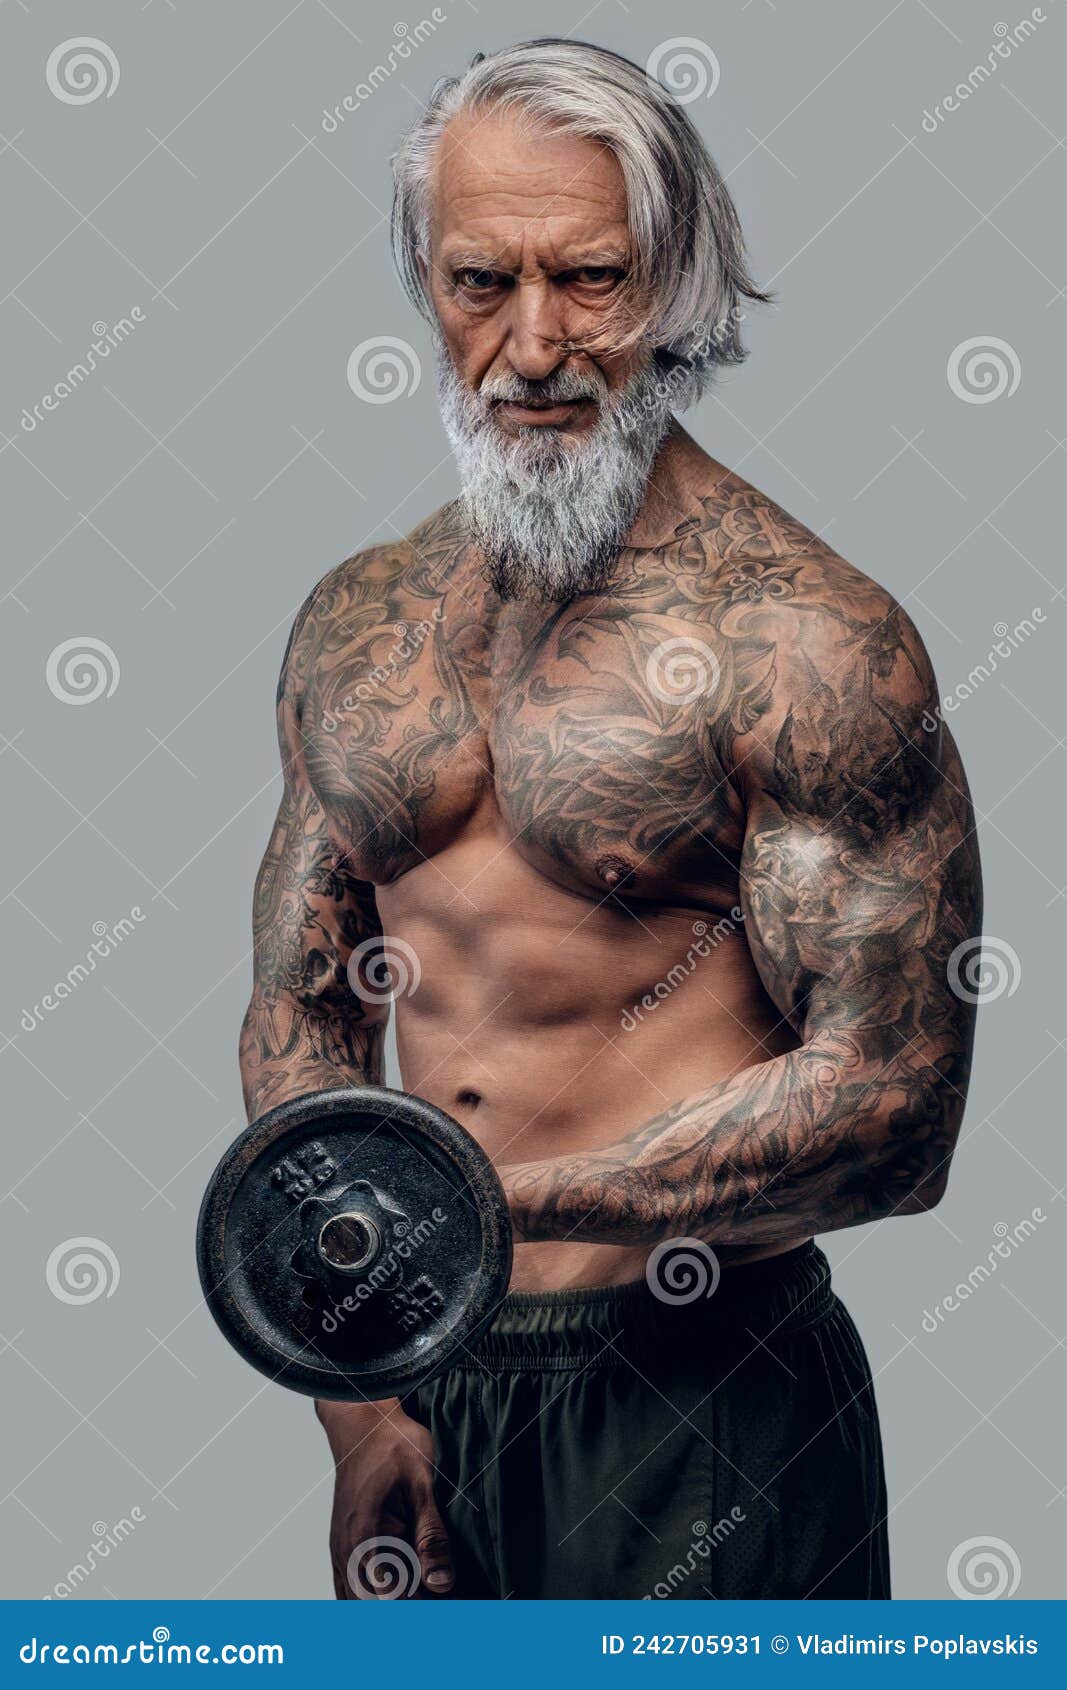 Naked Old Man Lifting Dumbell Against White Background Stock Image - Image of tattoo, mature: 242705931